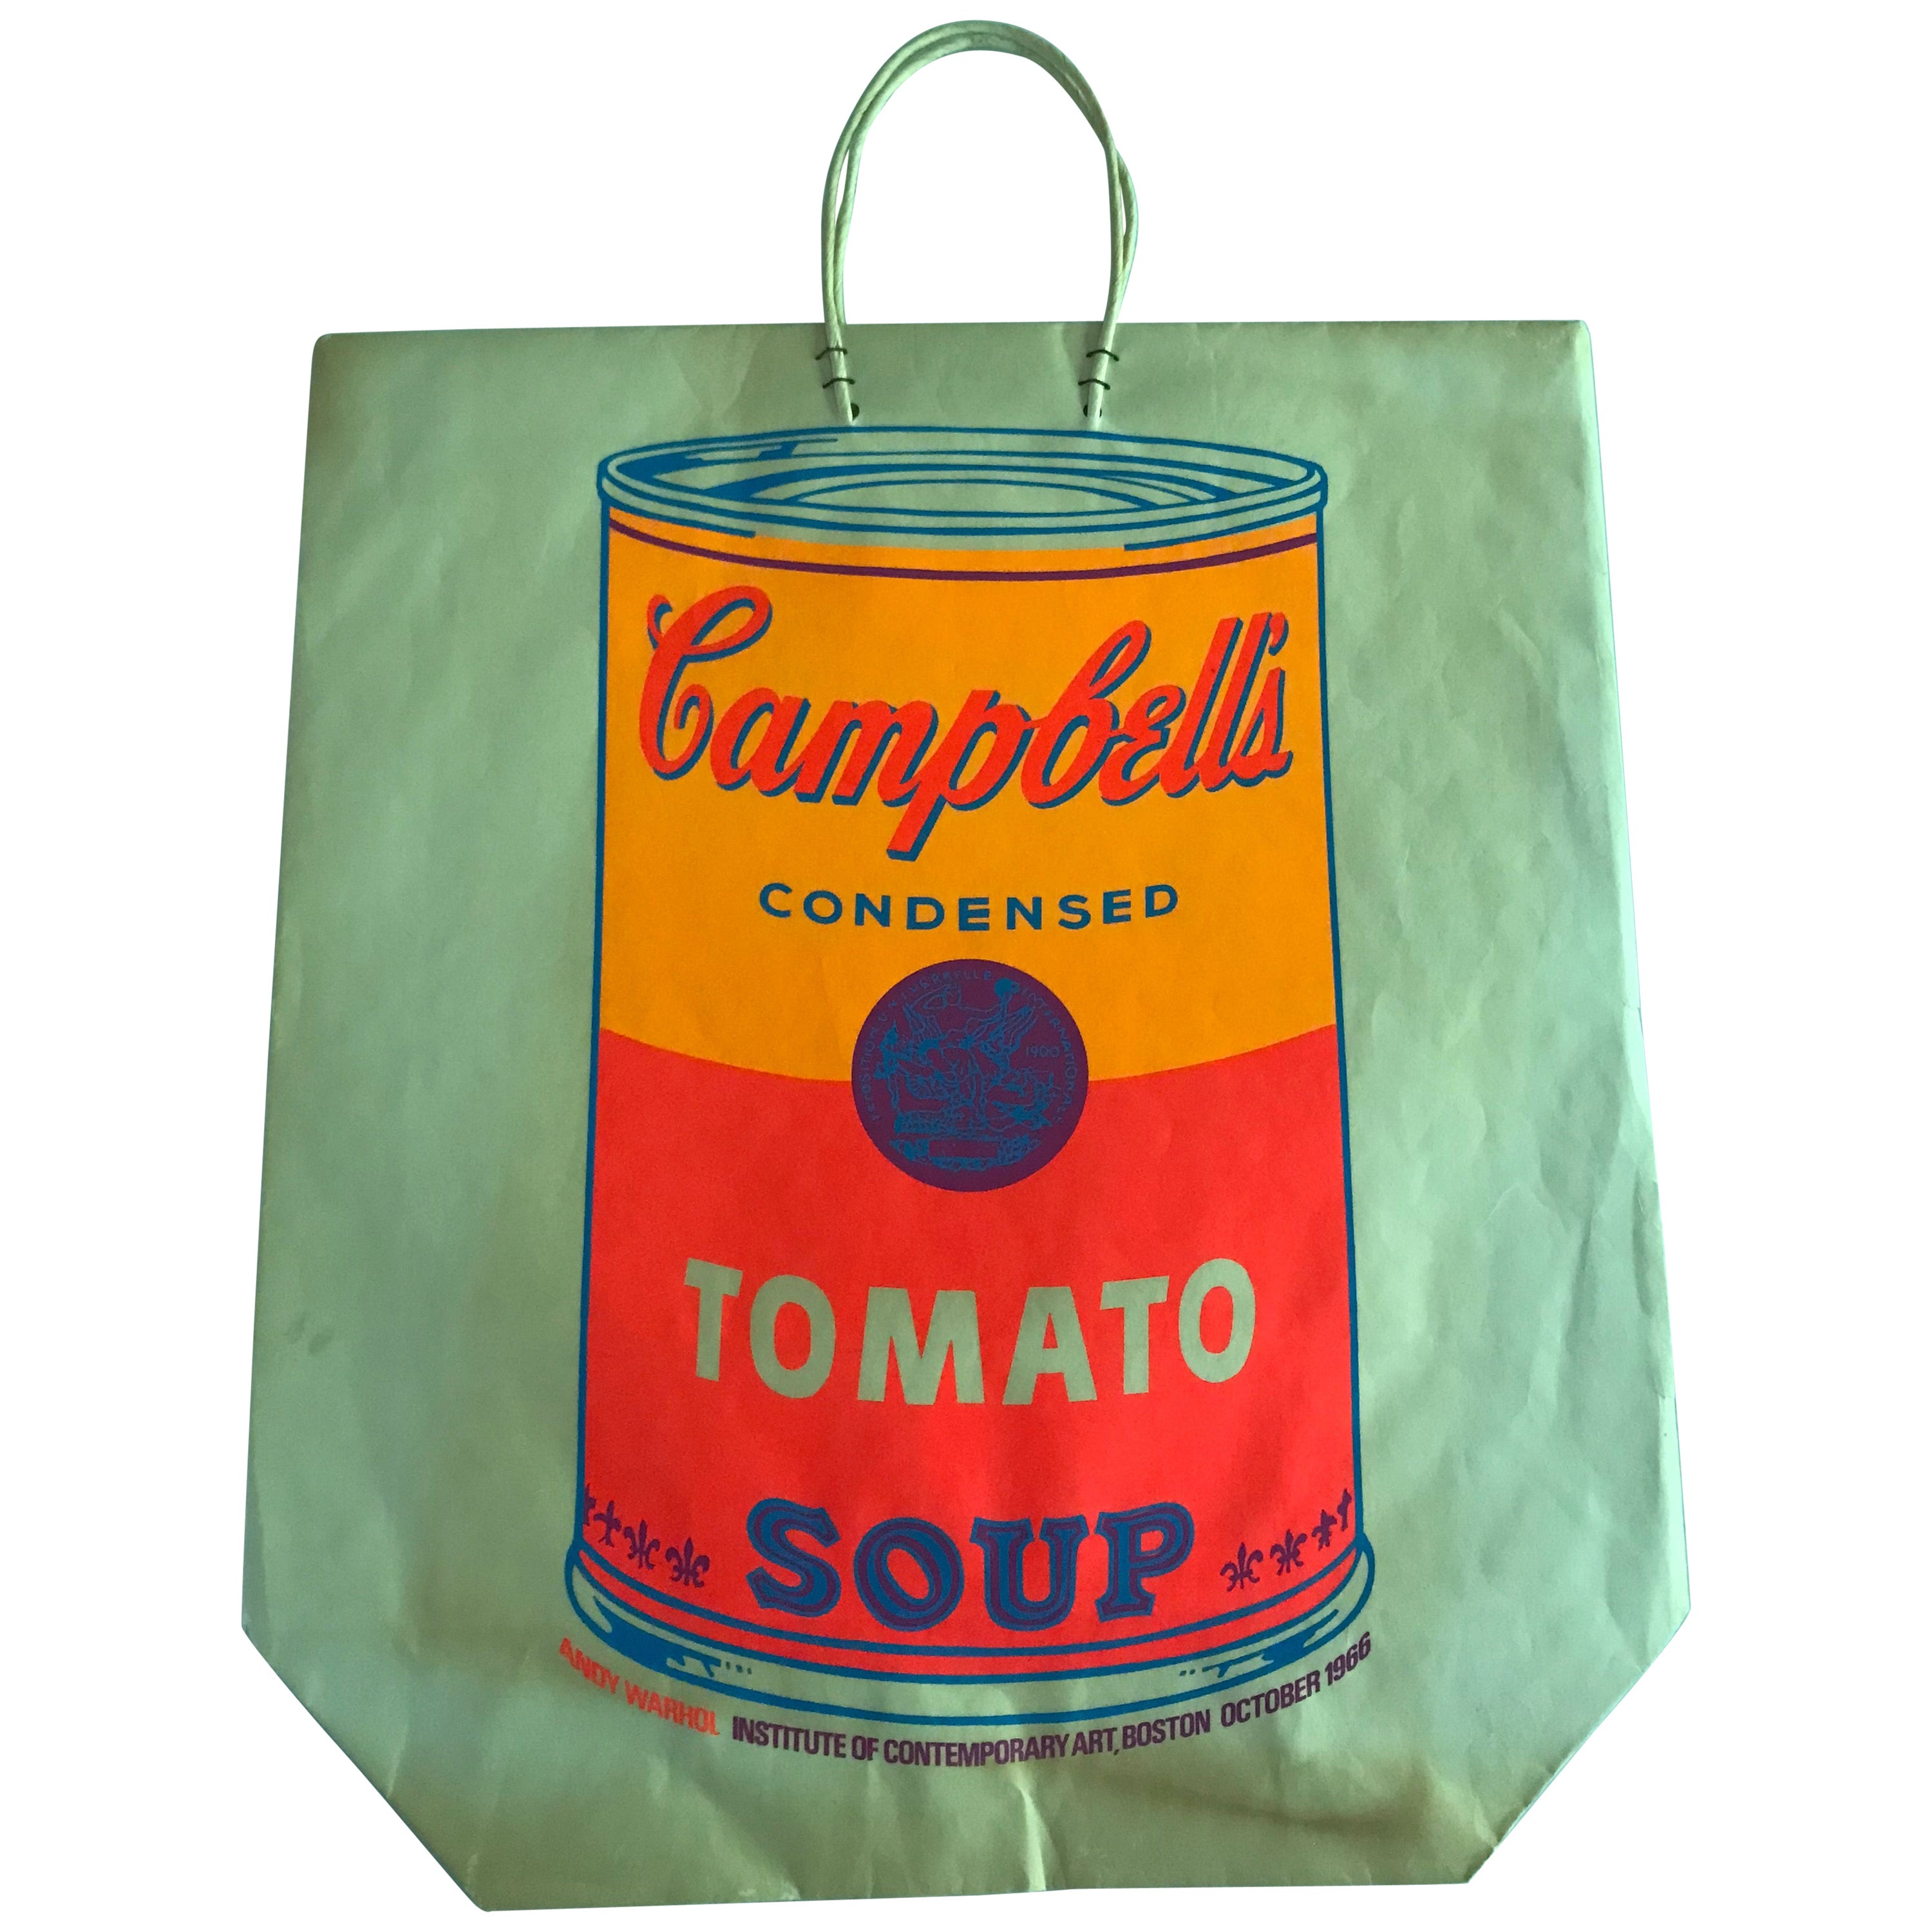 Andy Warhol Pop-Art Soup Can Screen-Print in Colors on Paper Bag 1966 